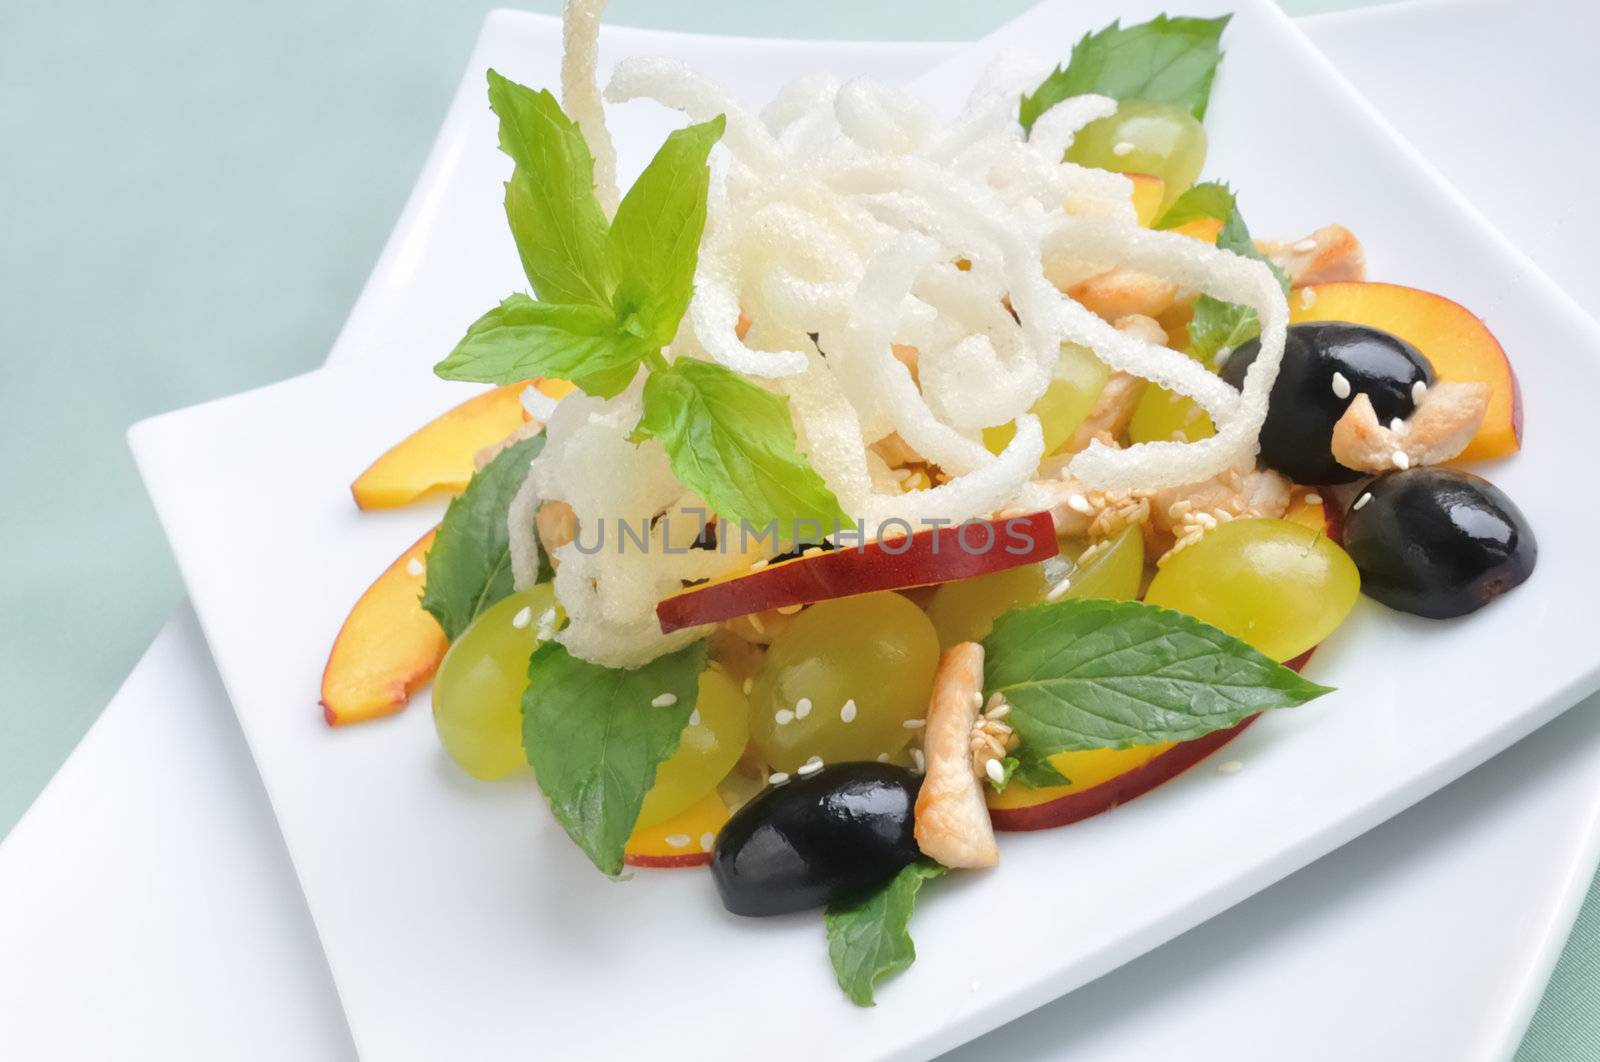 light salad with chicken, grapes, nectarines, sesame, with lemon dressing, decorated with fried rice noodles with mint